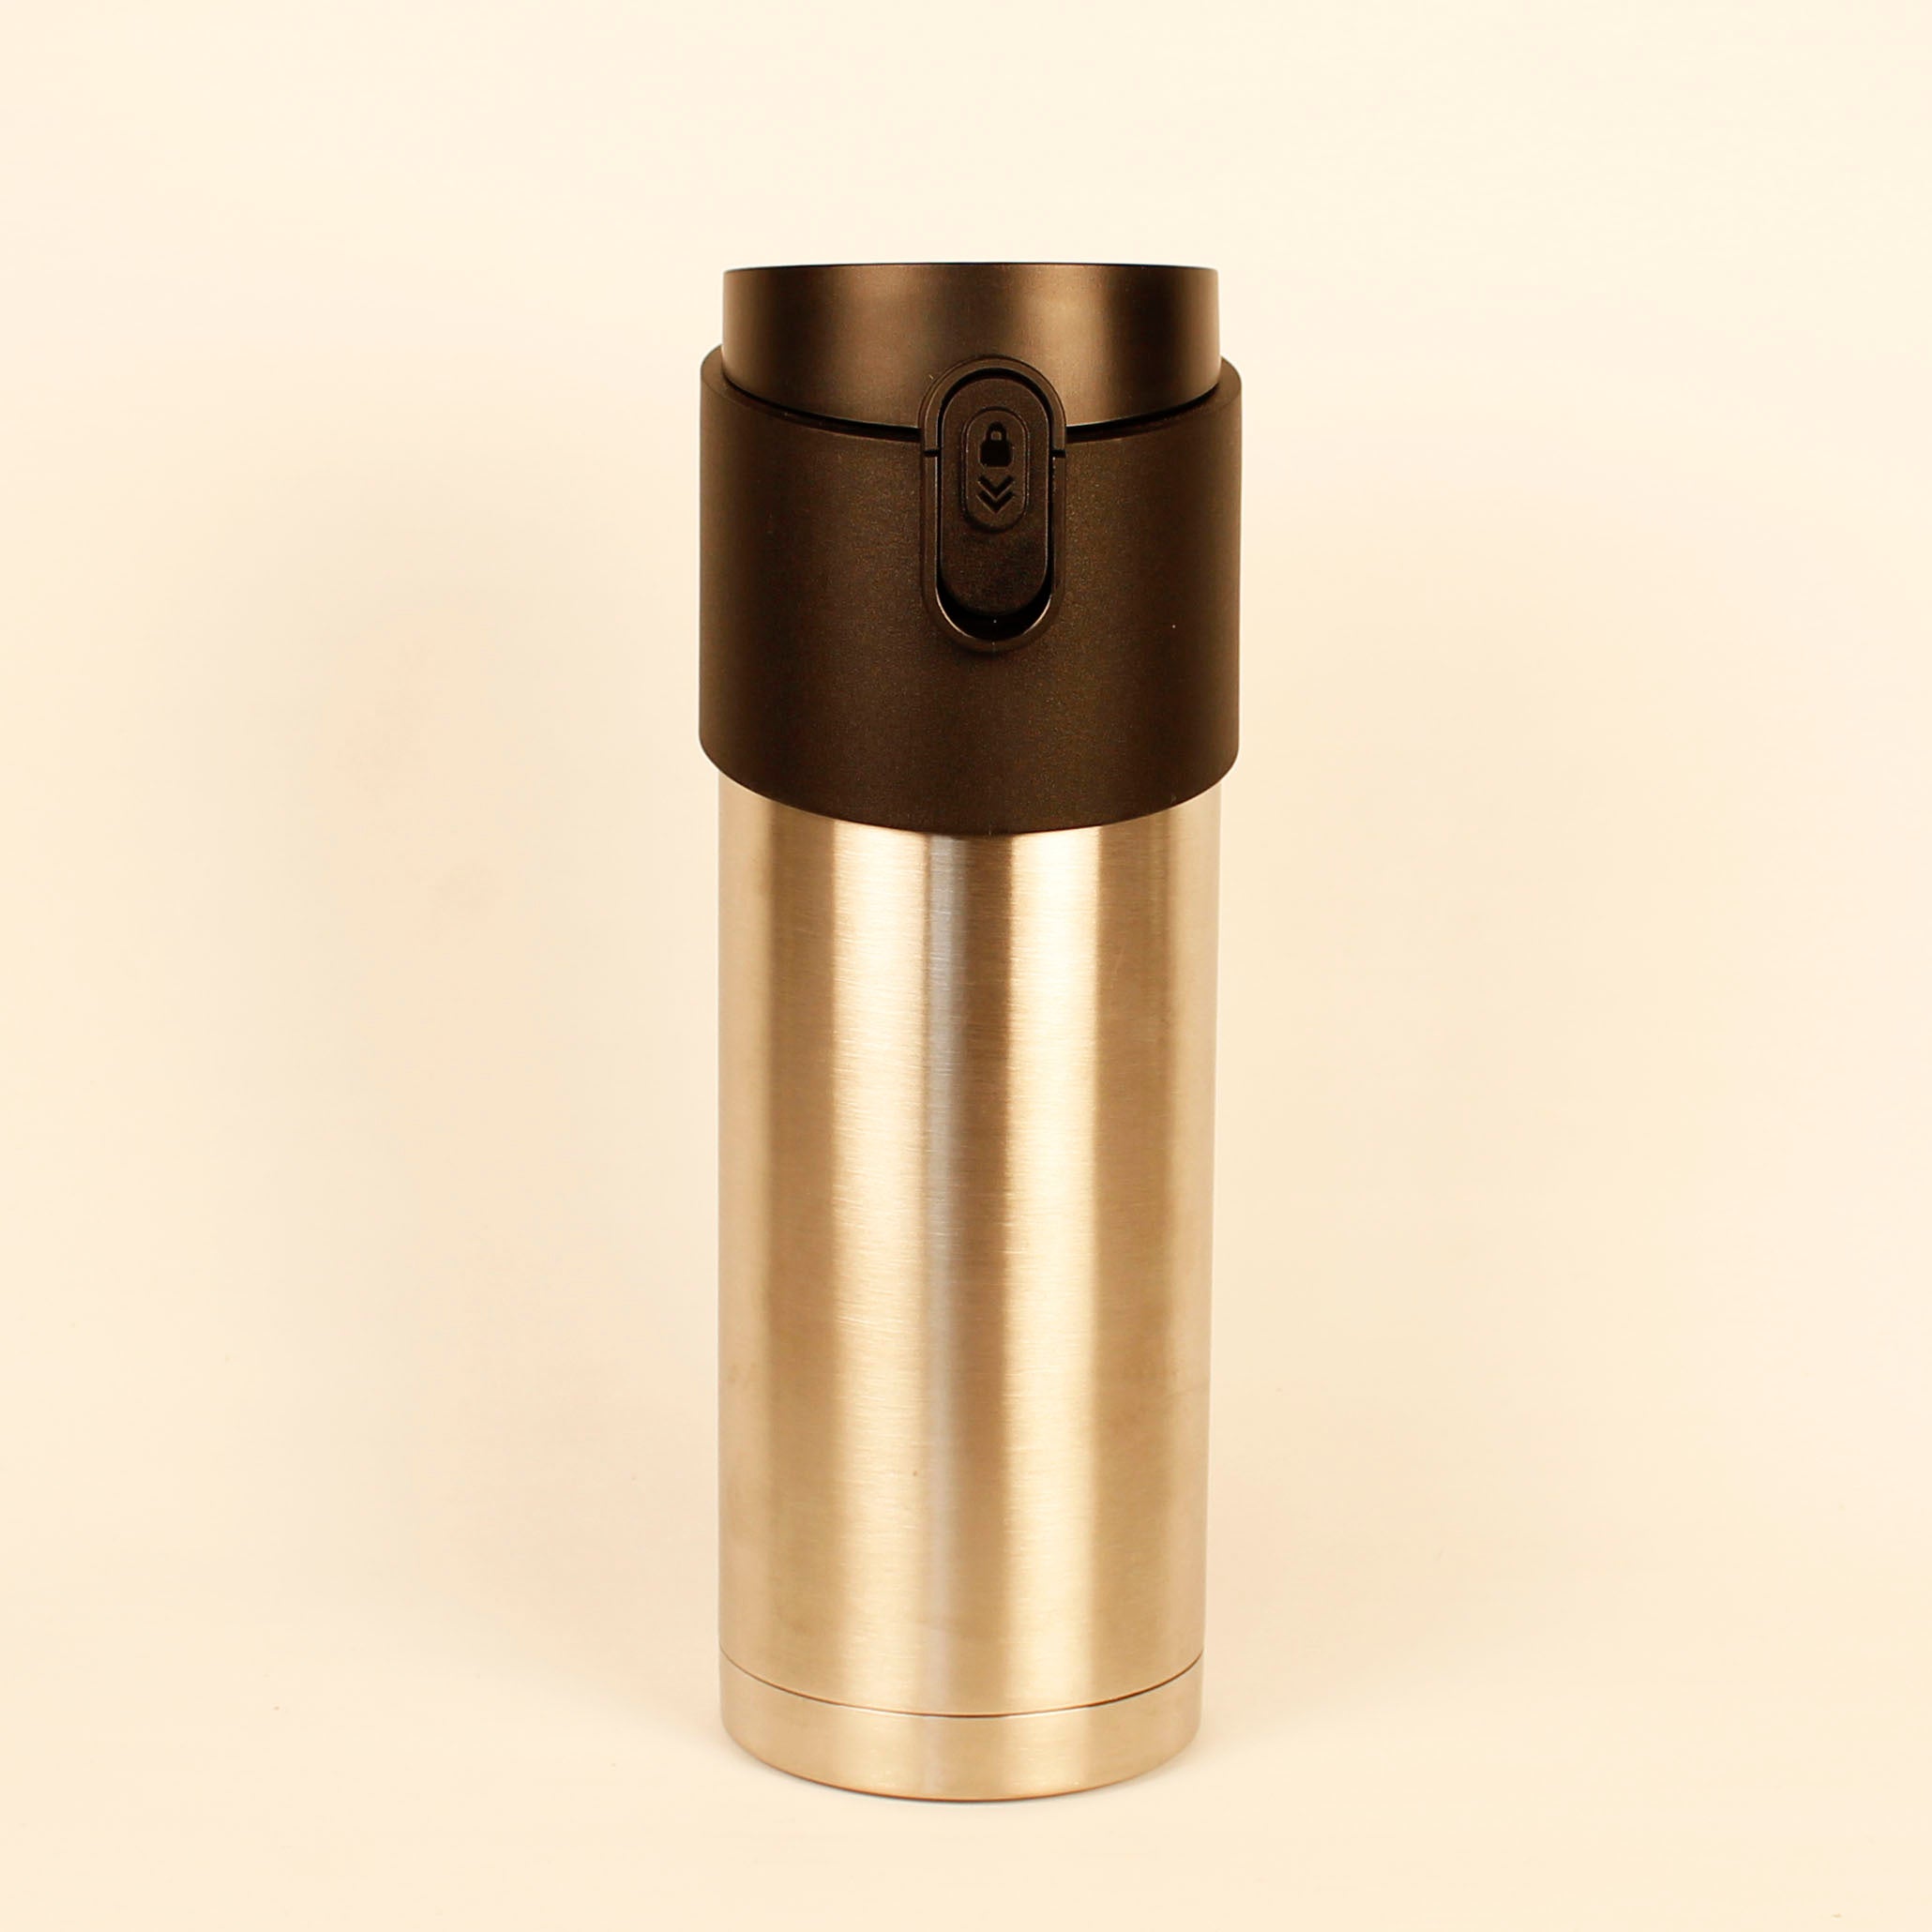 Pao Cha - stainless steel carrying cup